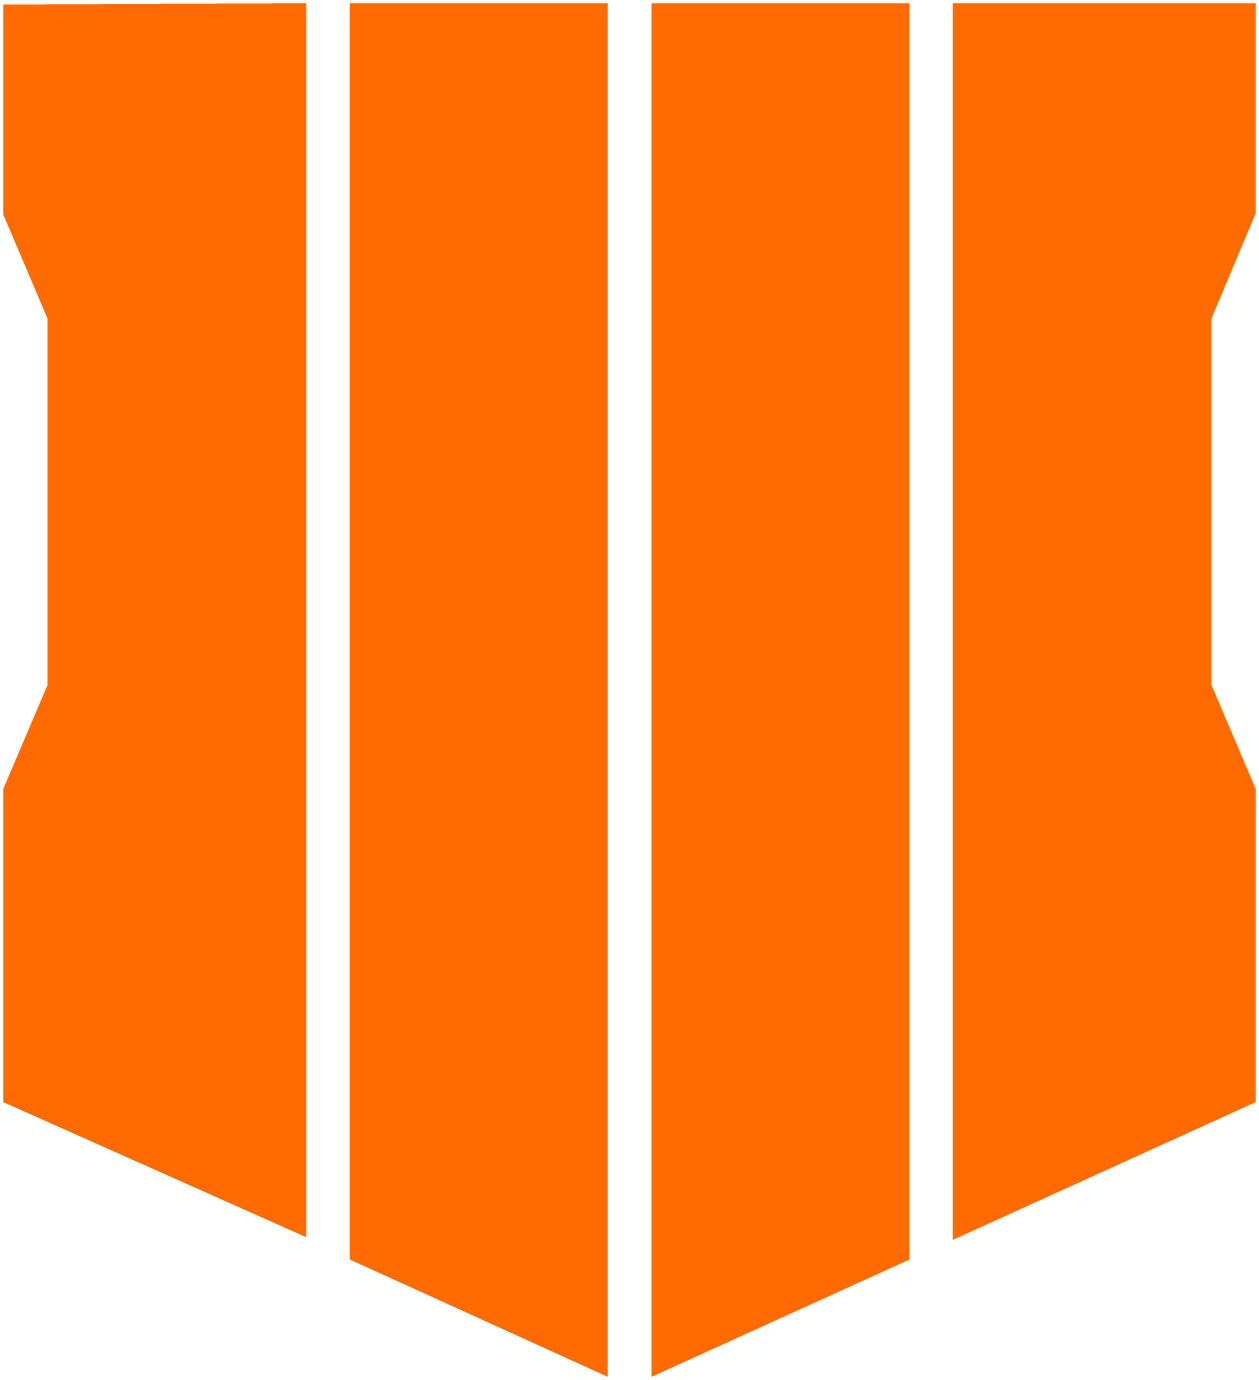 Call of Duty: Black Ops 4 Logo PNG Image.